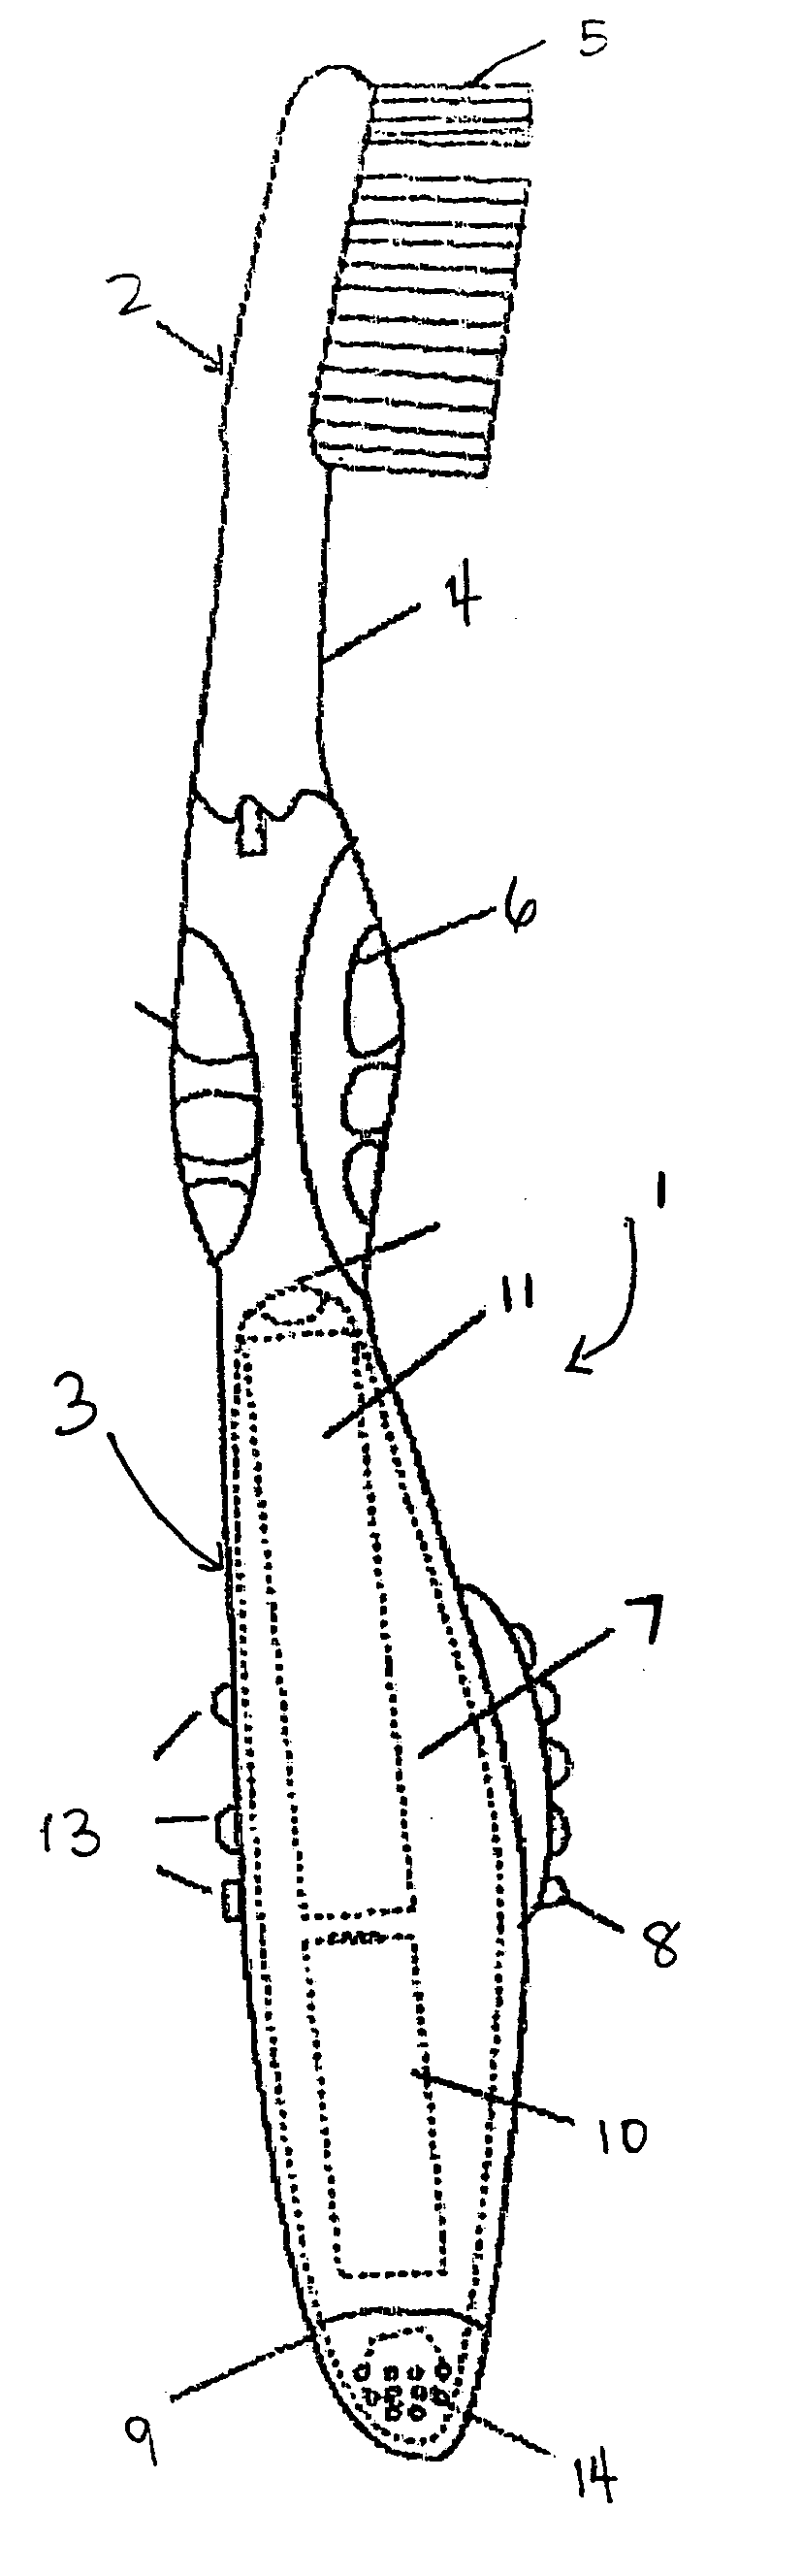 Oral care device capable of producing and recording sound